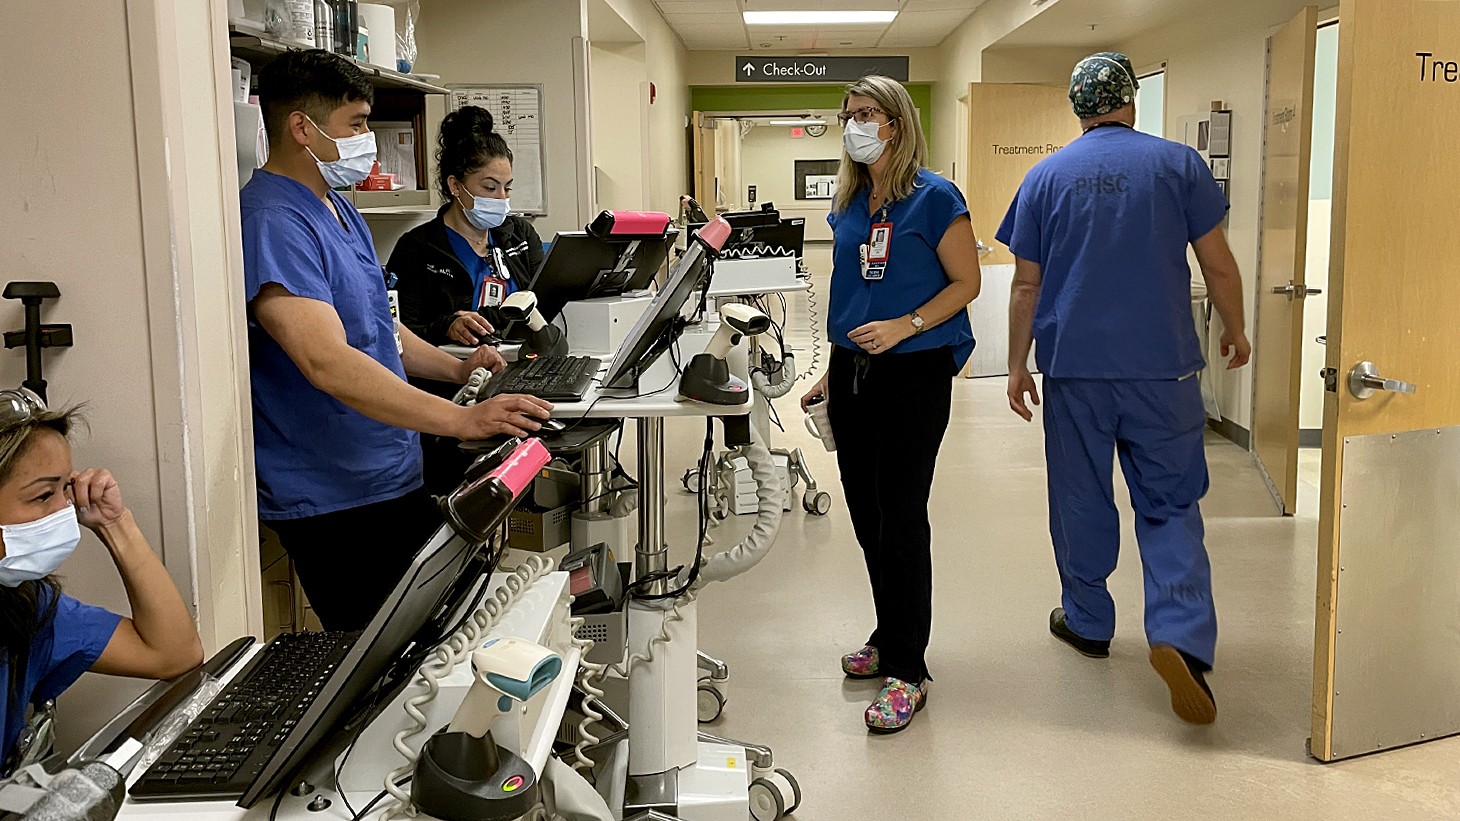 4 health care workers wearing blue scrubs in a busy emergency room hallway